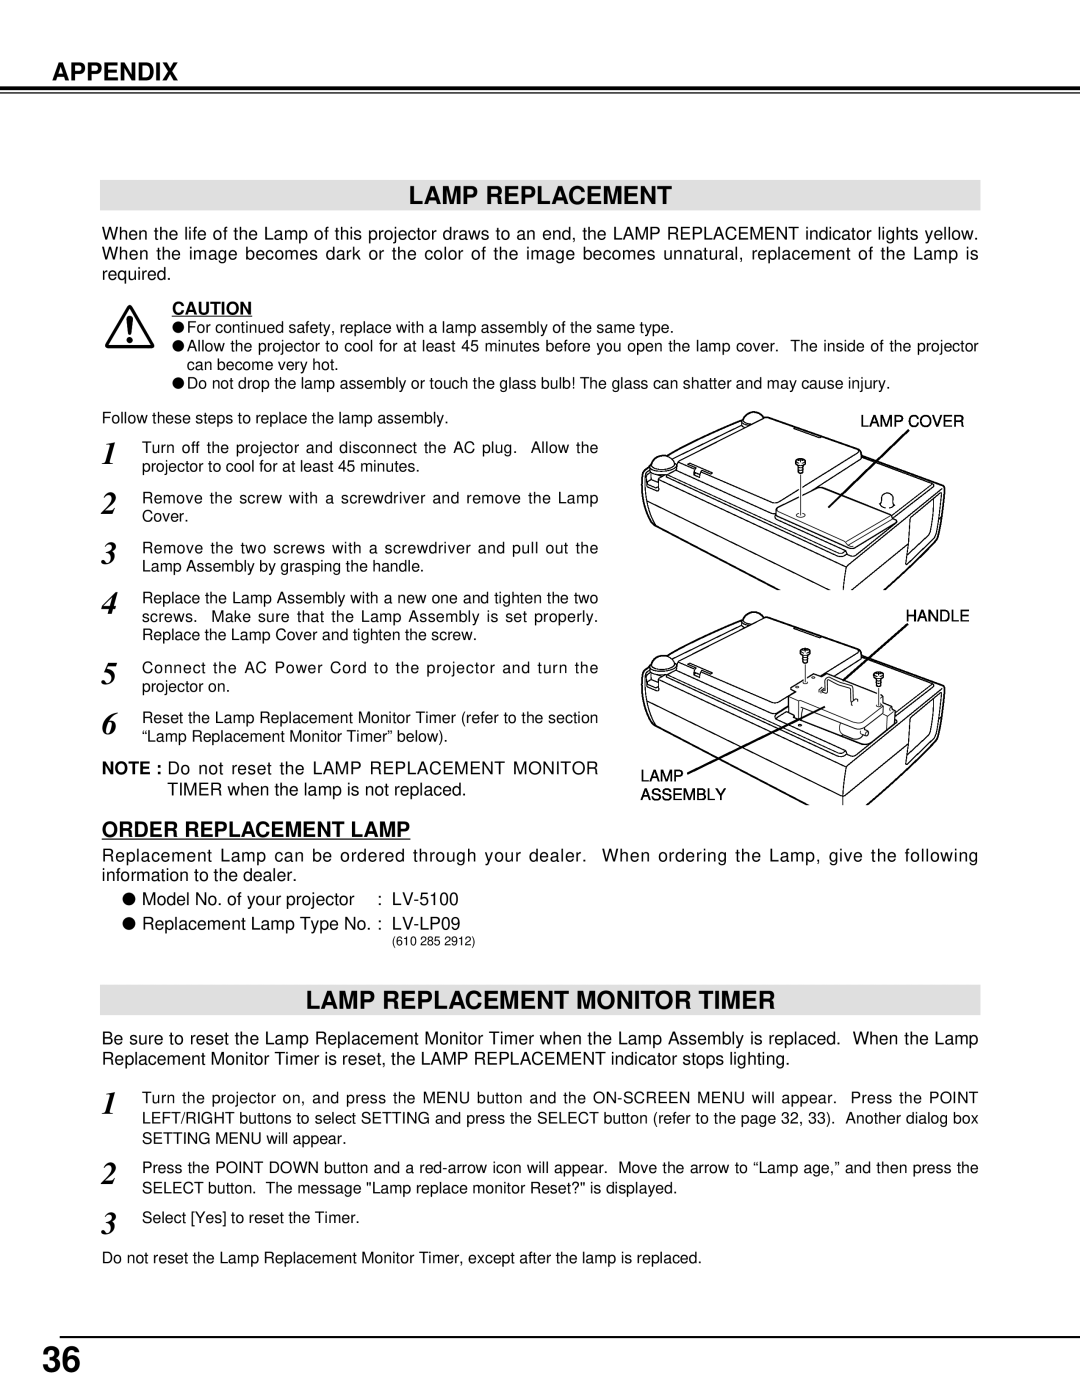 Canon 5100 owner manual Appendix Lamp Replacement, Lamp Replacement Monitor Timer, Order Replacement Lamp 